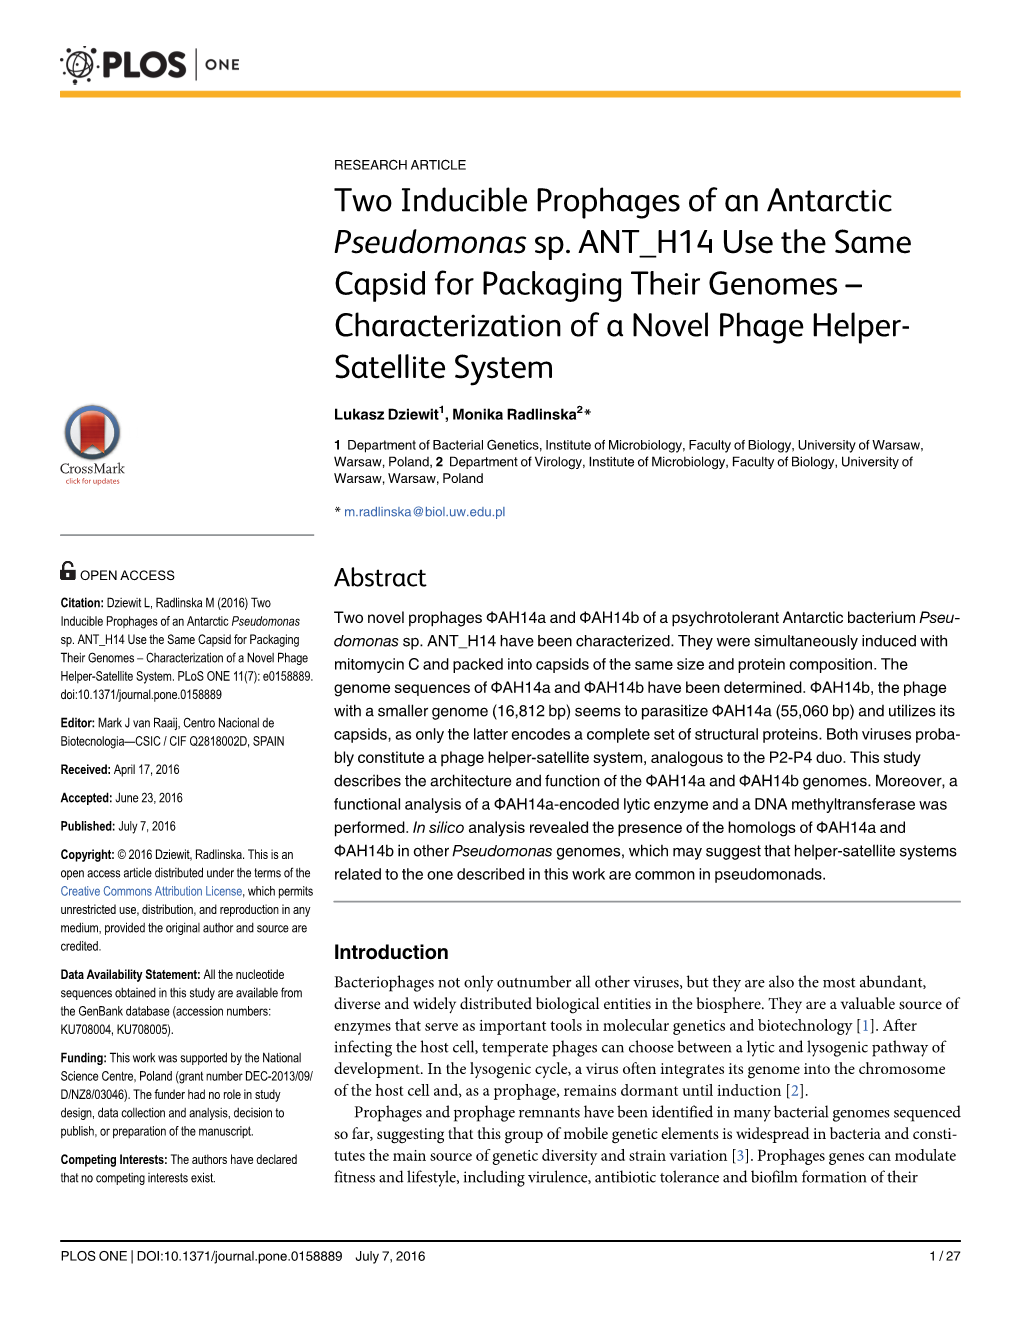 Two Inducible Prophages of an Antarctic Pseudomonas Sp